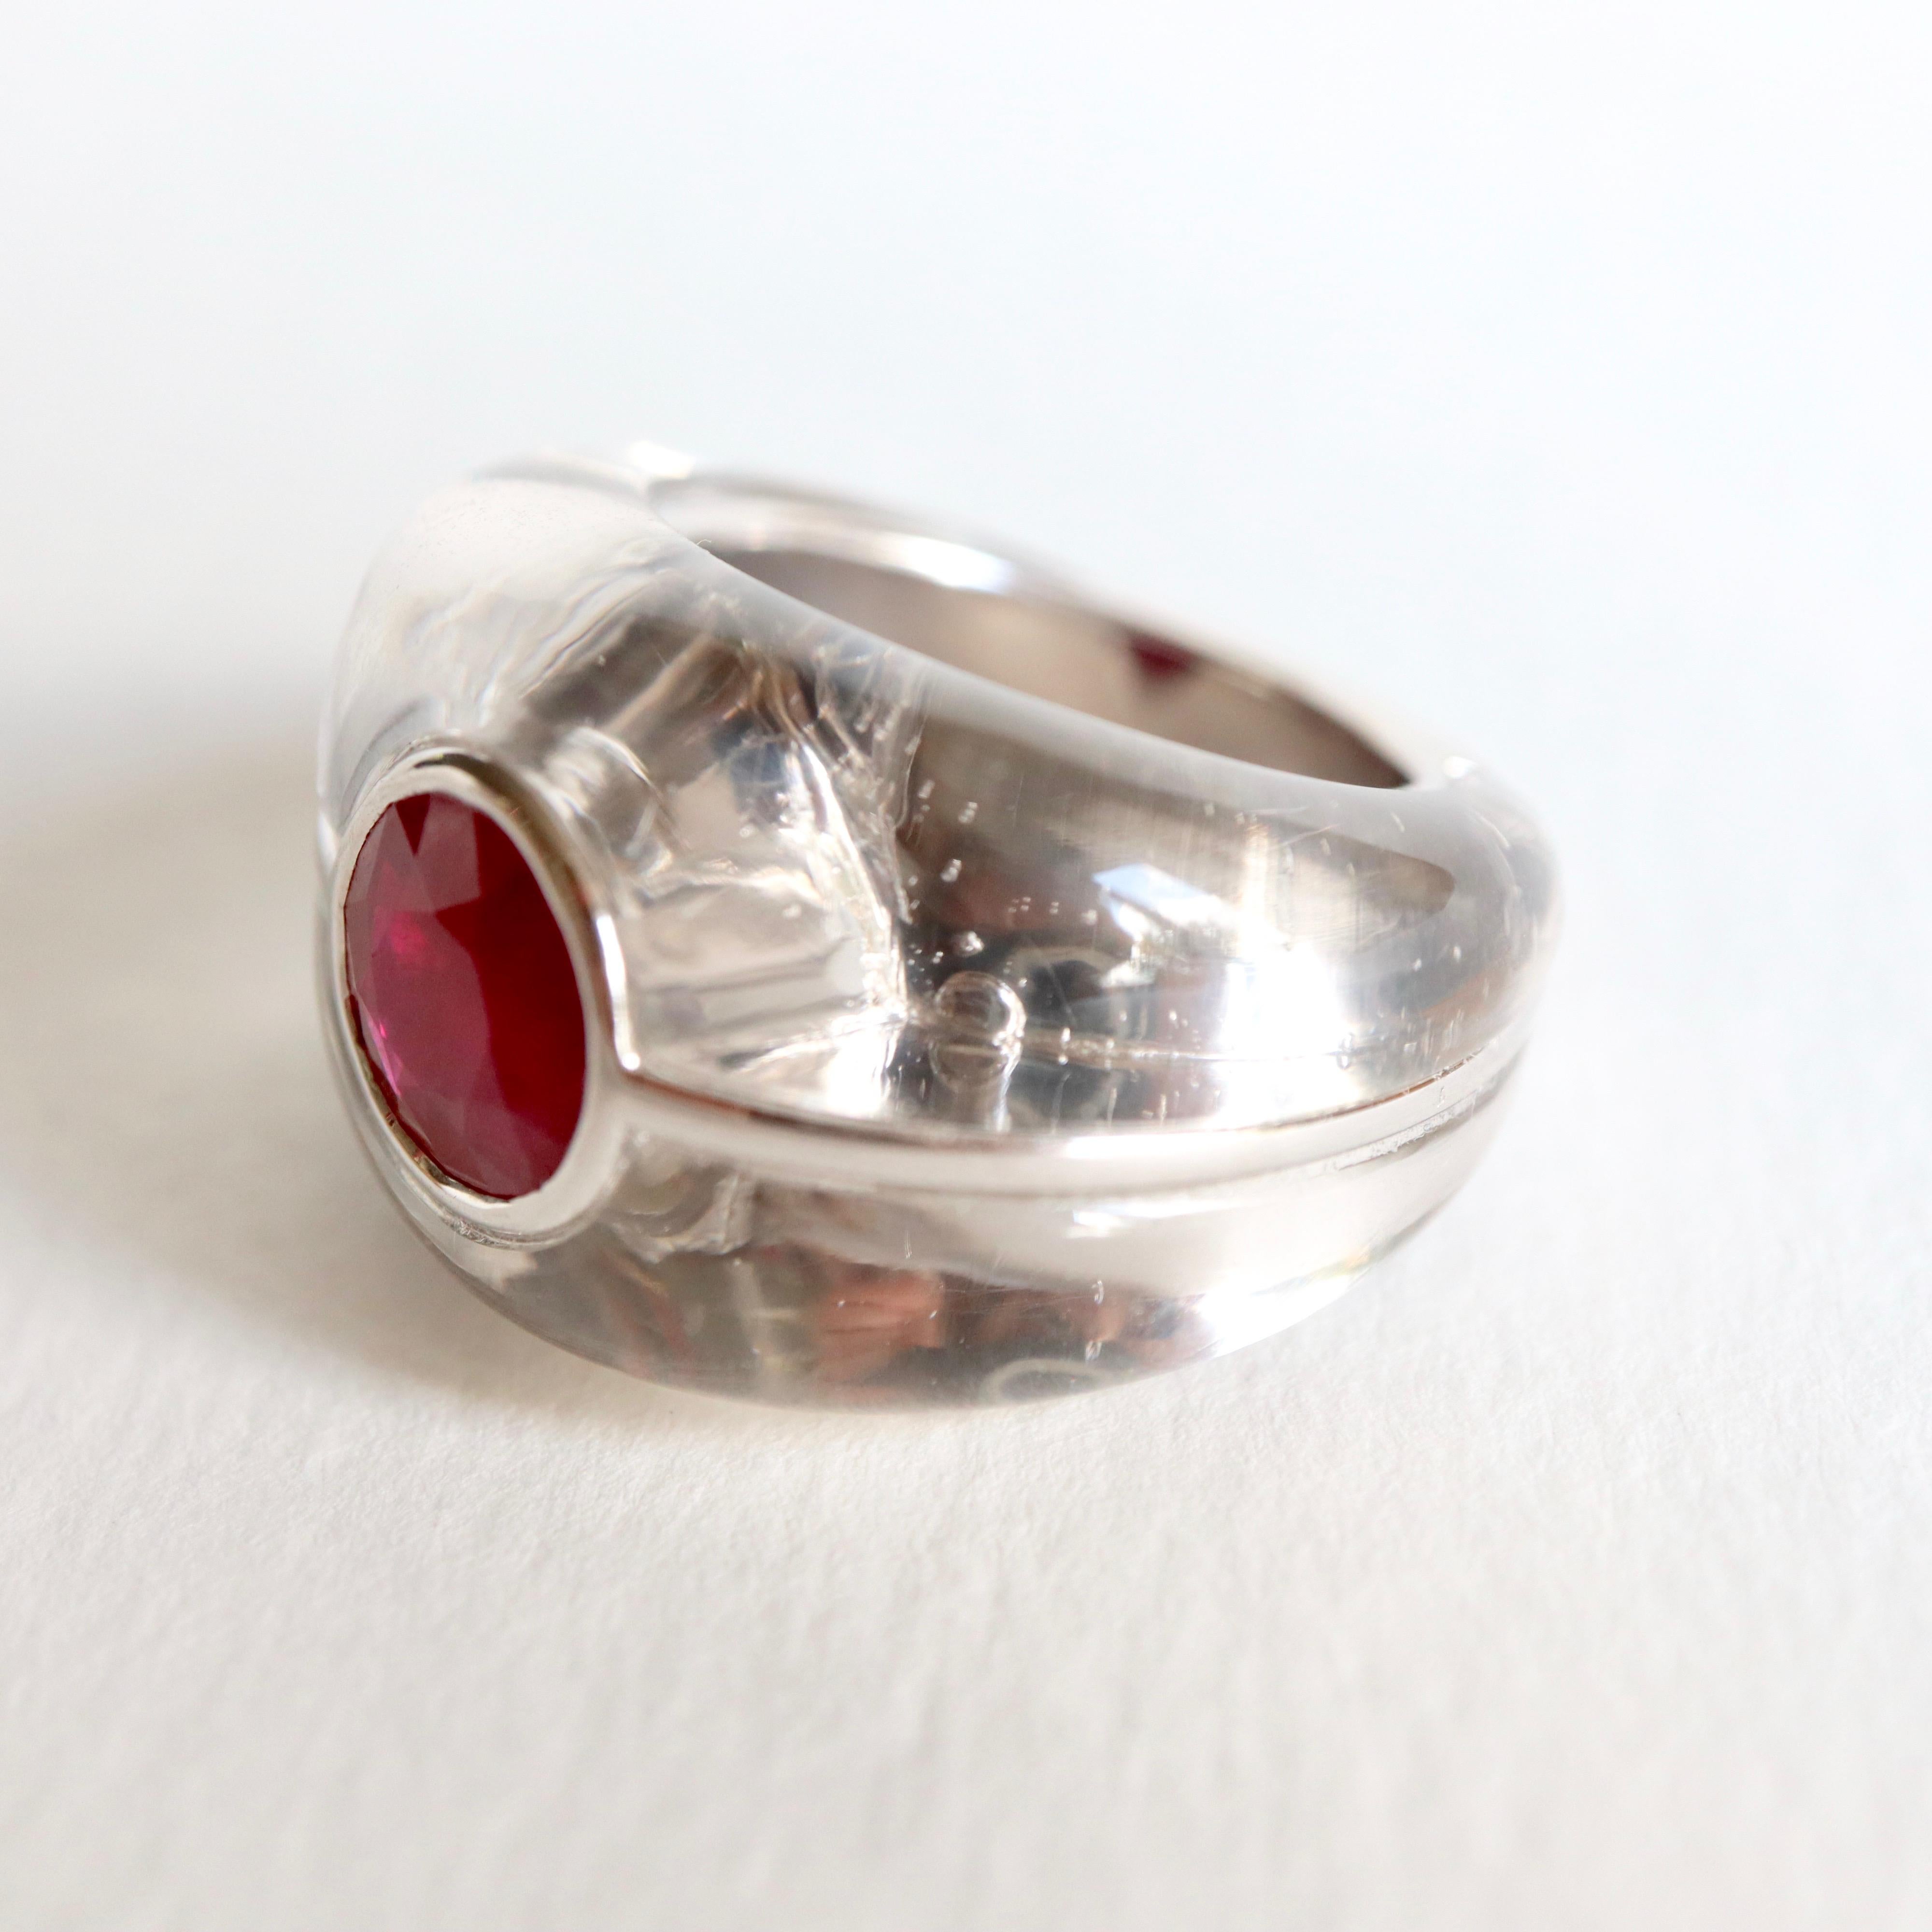 Mauboussin Ring in Rock Crystal and Ruby 3 Carat and 18 Carat White Gold For Sale 2